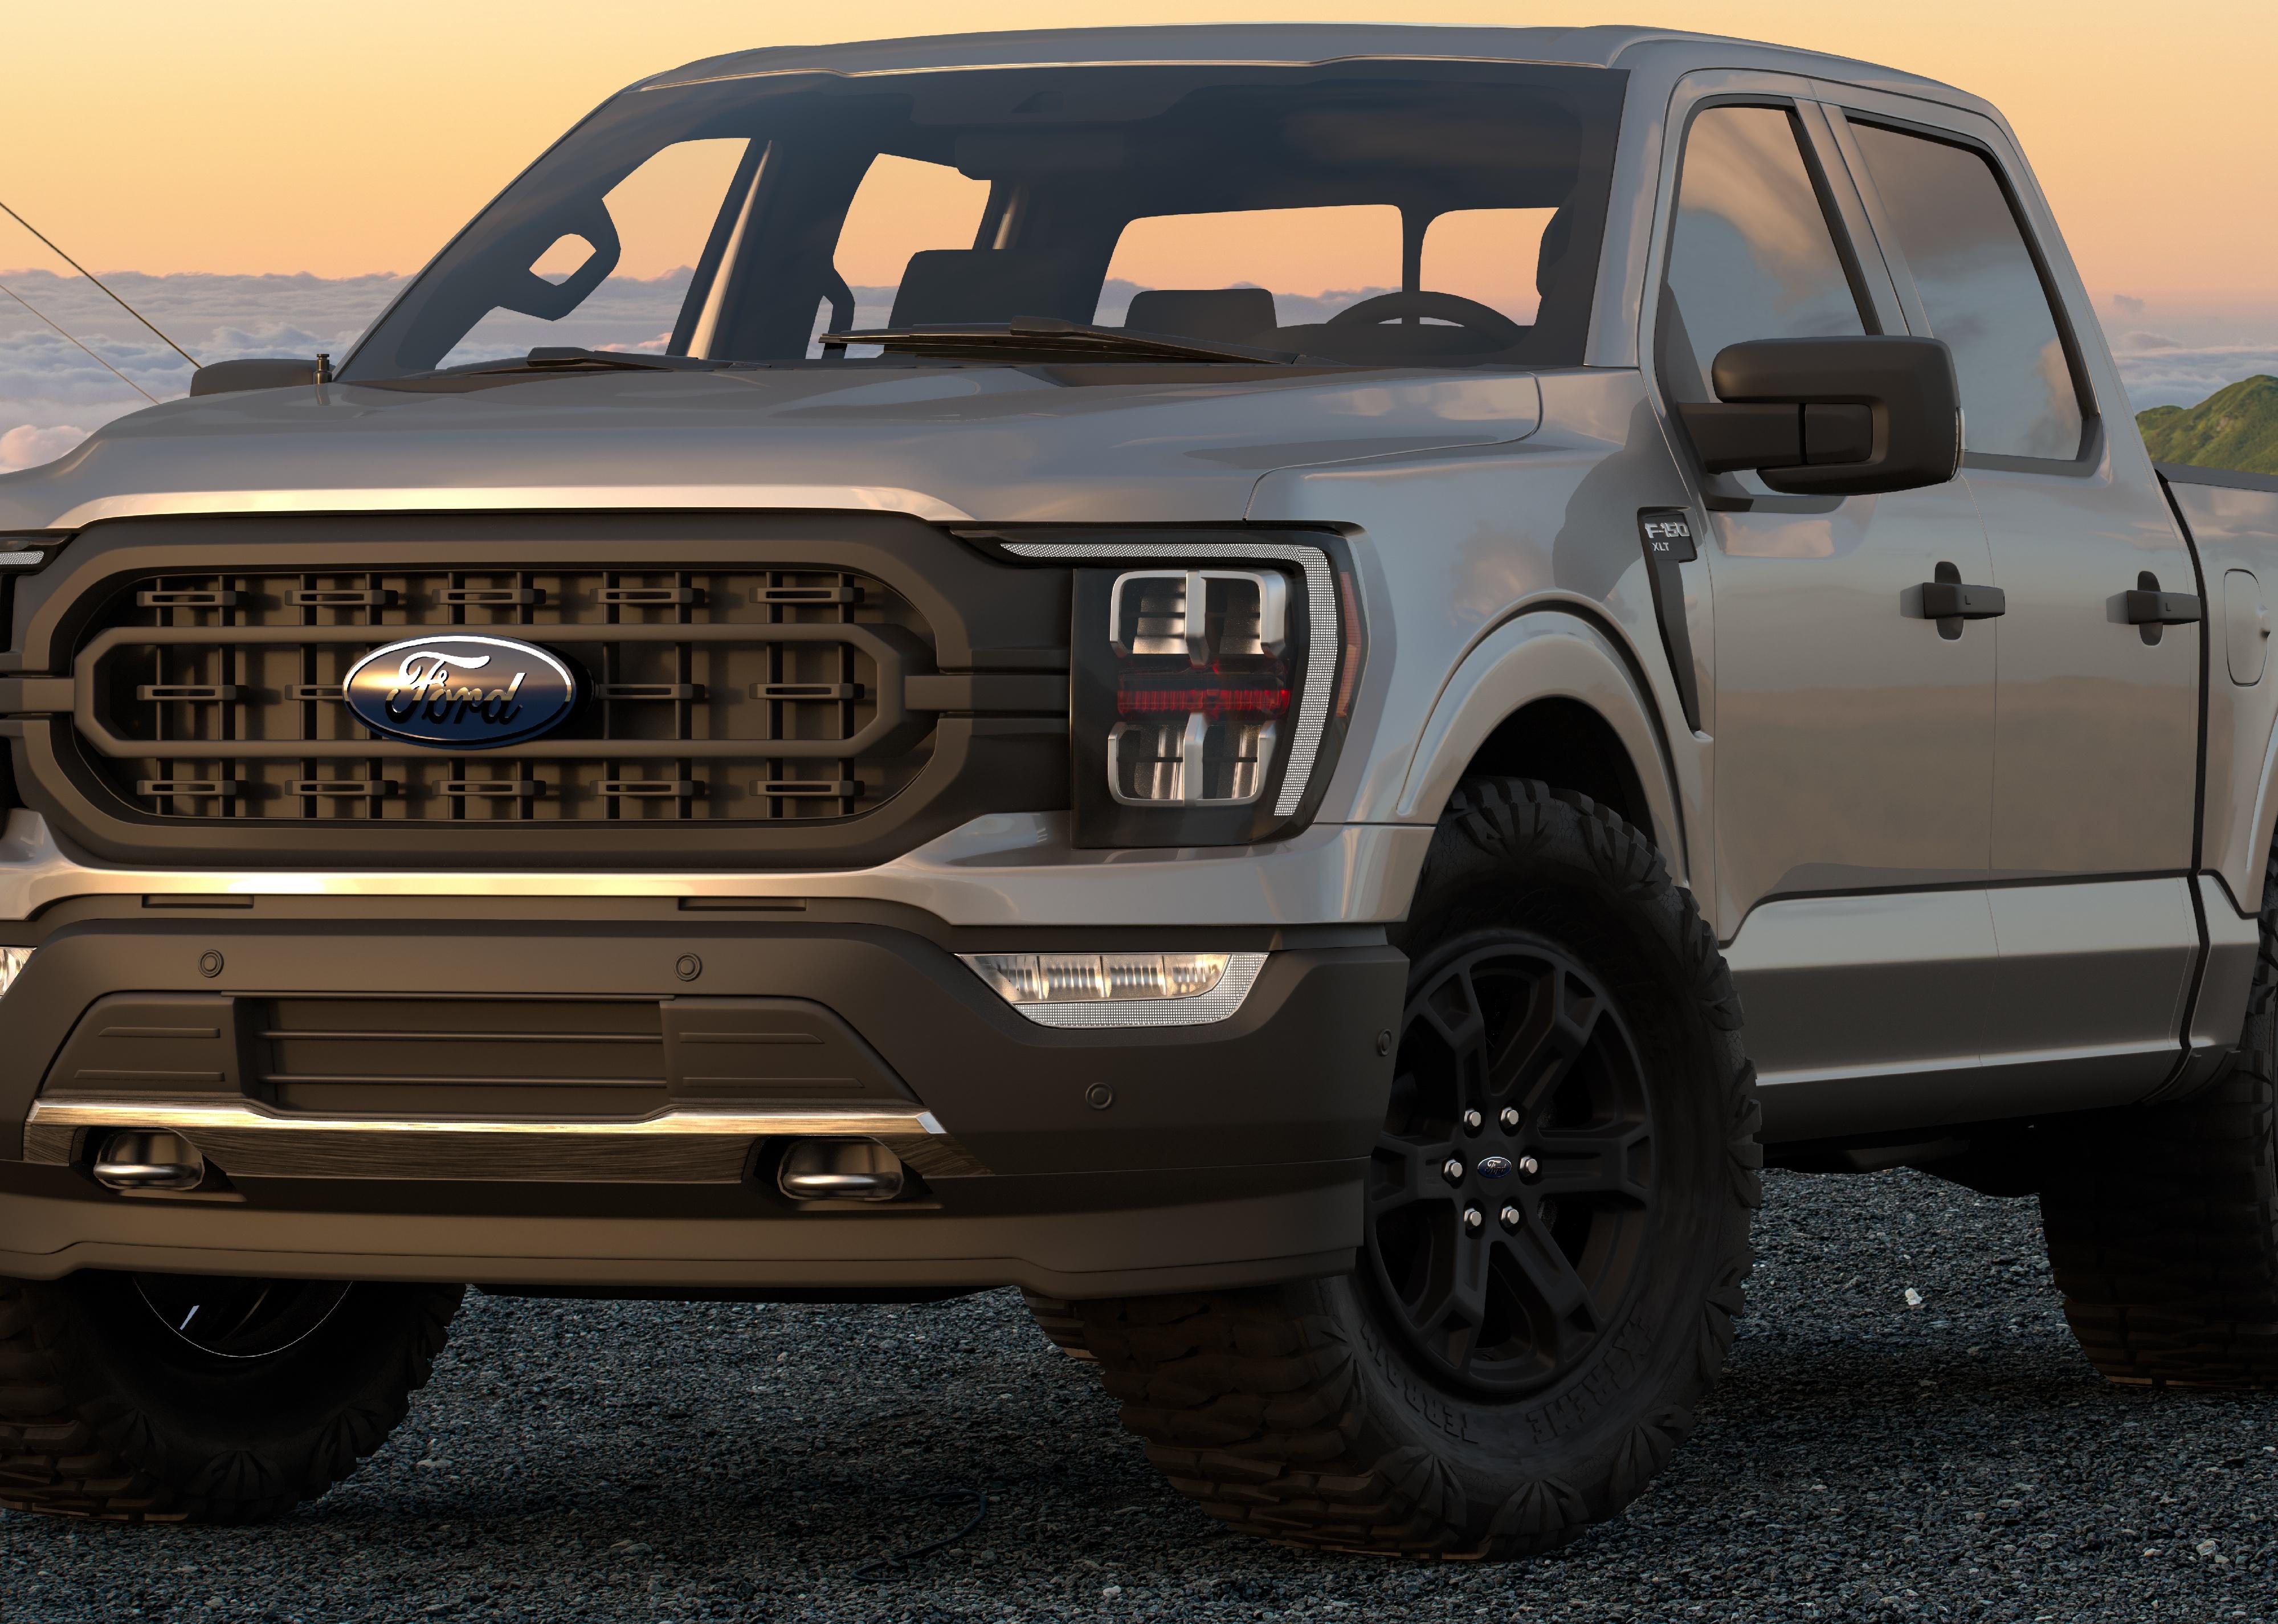 Rendering of a Ford F-150 Rattler with a sunset.